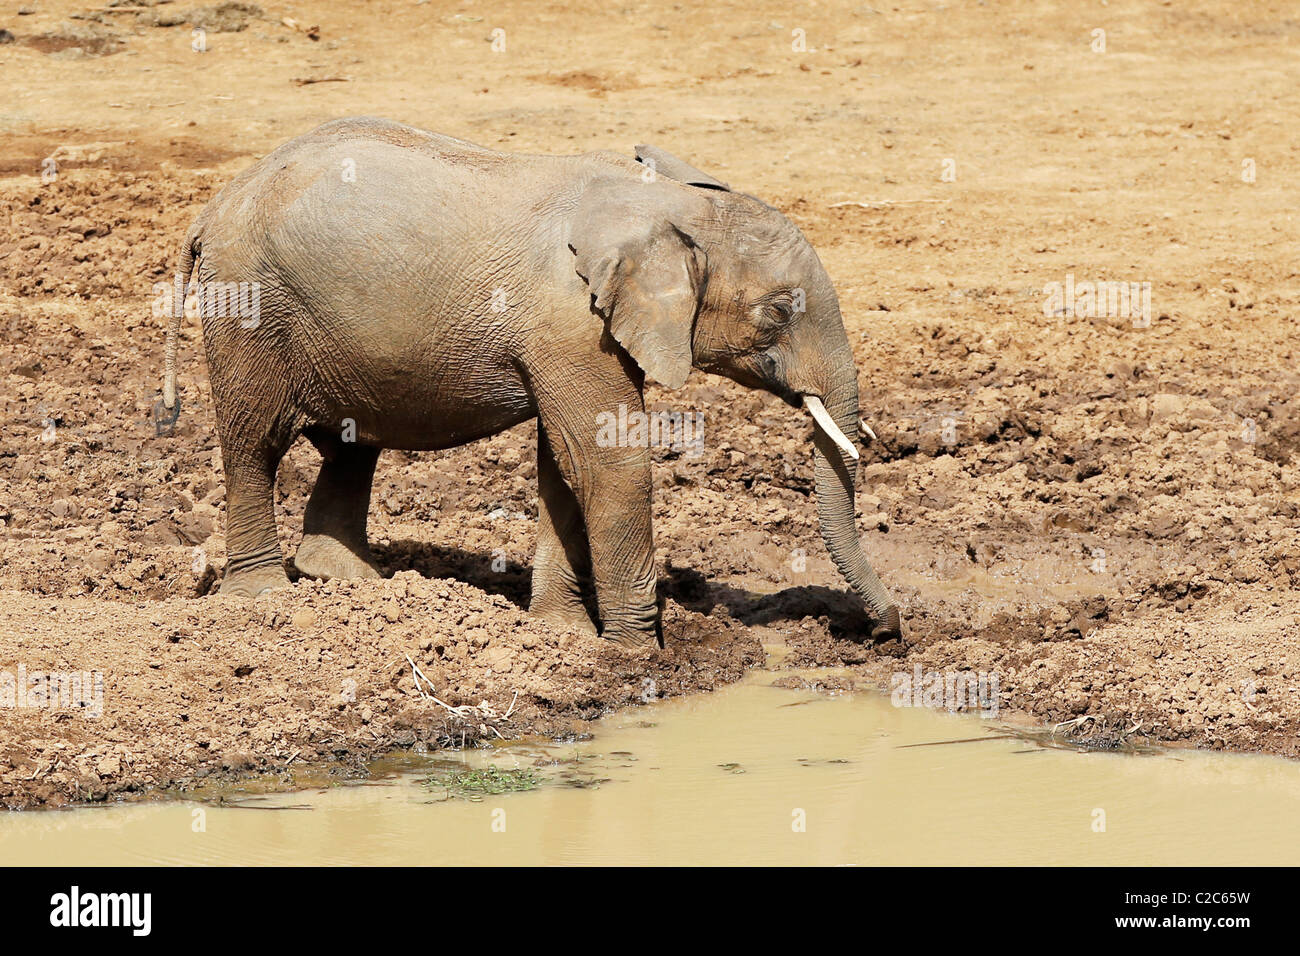 An African Elephant drinking at a watering hole in Kenya Stock Photo